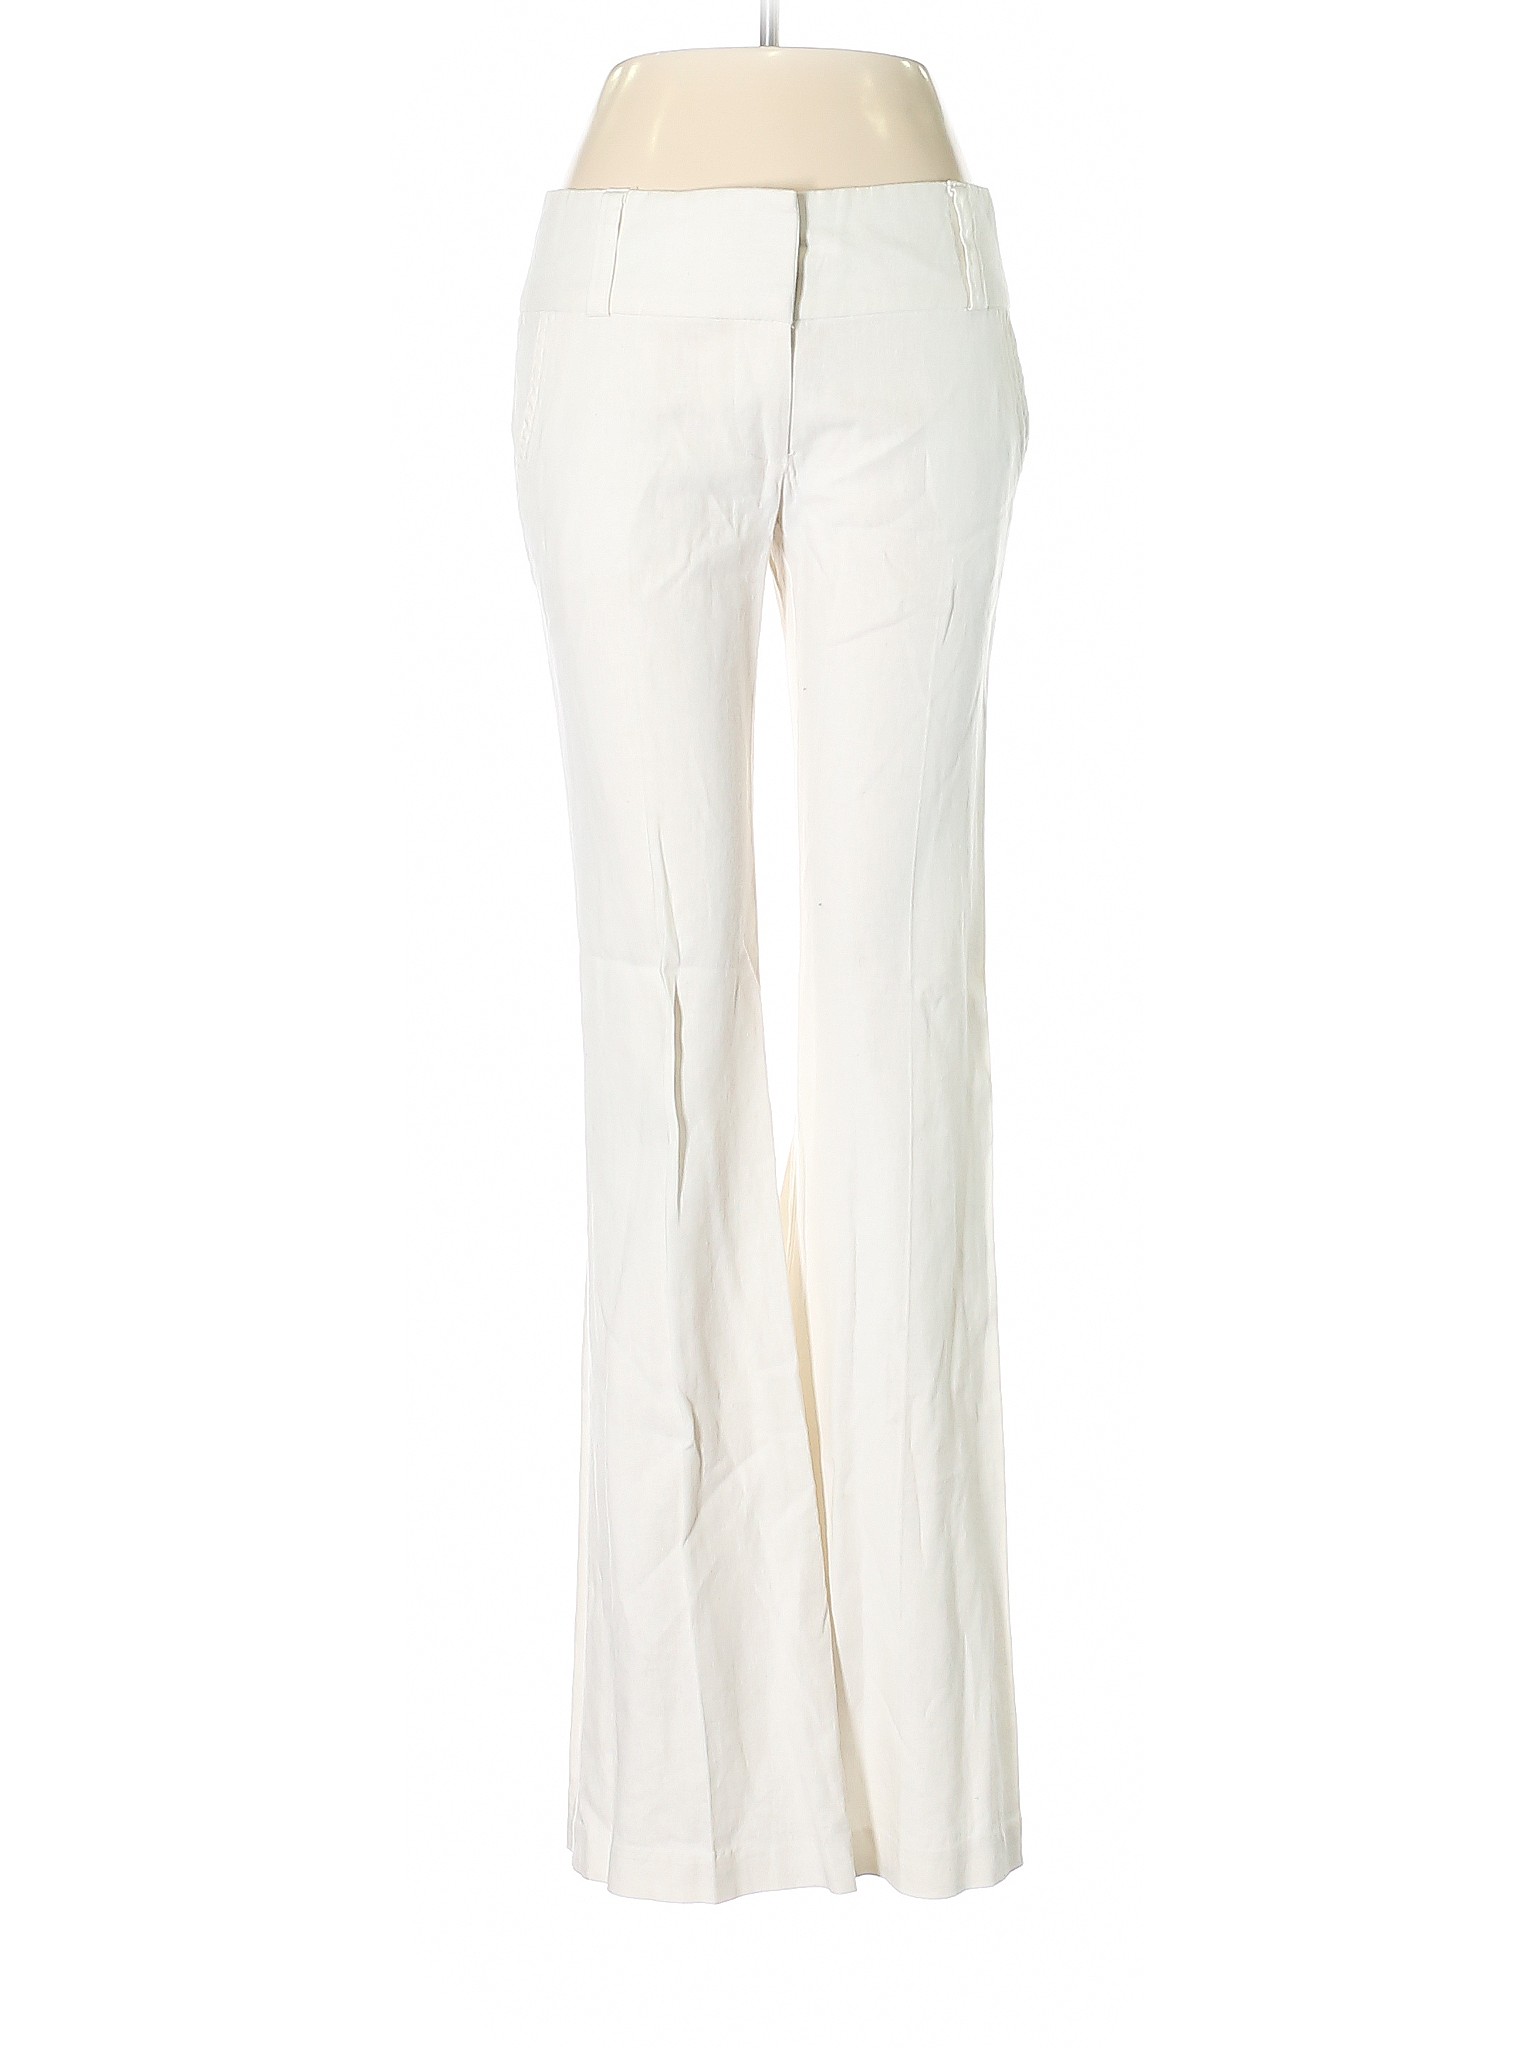 charlotte russe white jeans